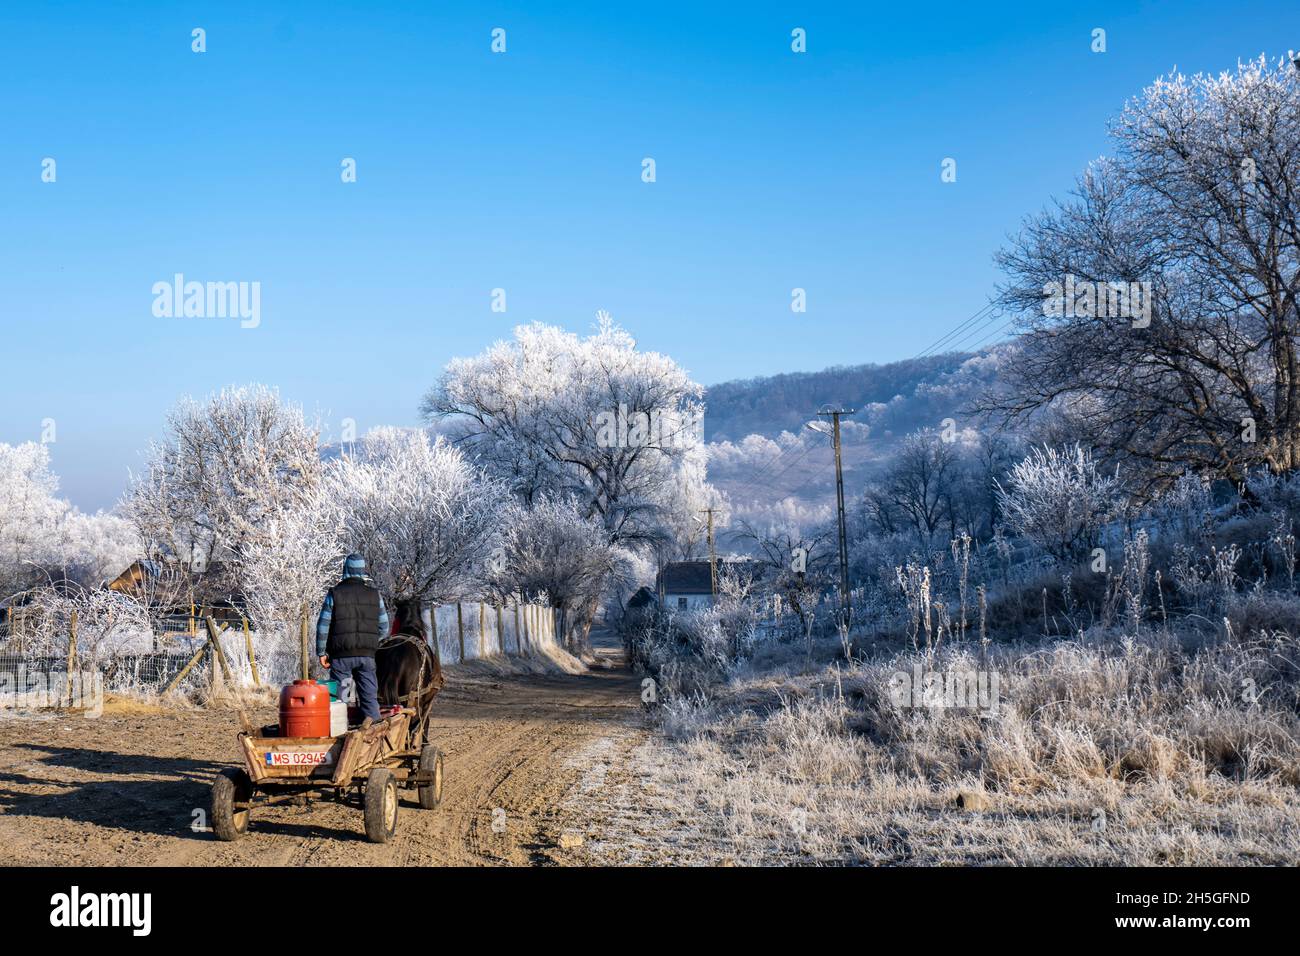 Man transporting goods with a horse pulling a wagon; Cund, Transylvania, Romania Stock Photo